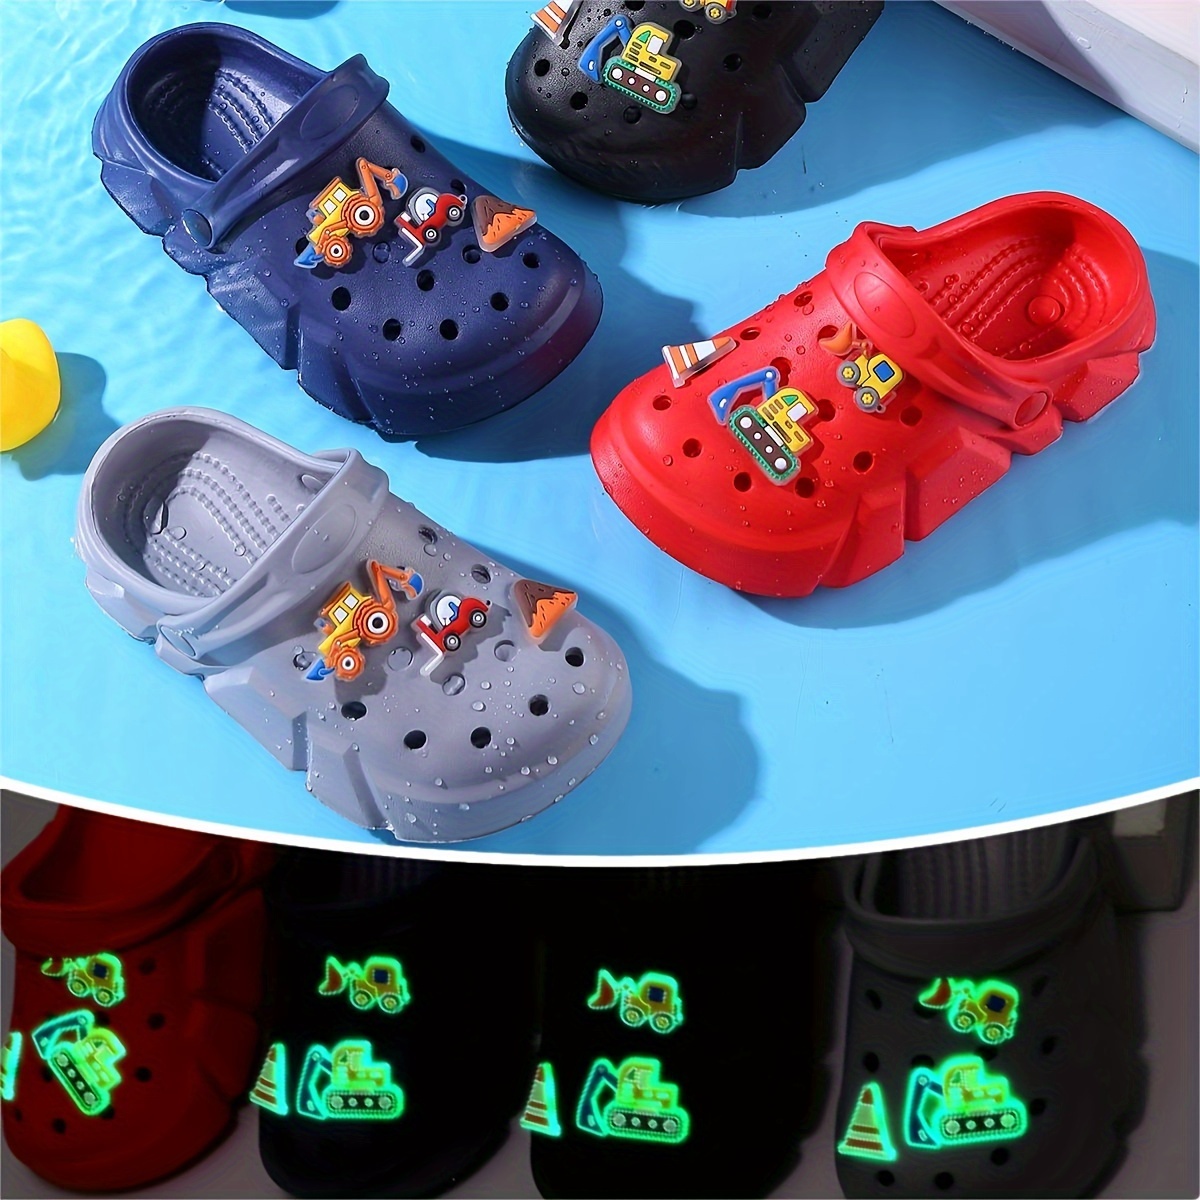 

Casual Breathable Clogs With 6pcs Cartoon Excavator Charms For Boys, Quick Drying Lightweight Anti Slip Clogs For Indoor Outdoor Shower Beach Pool, All Seasons